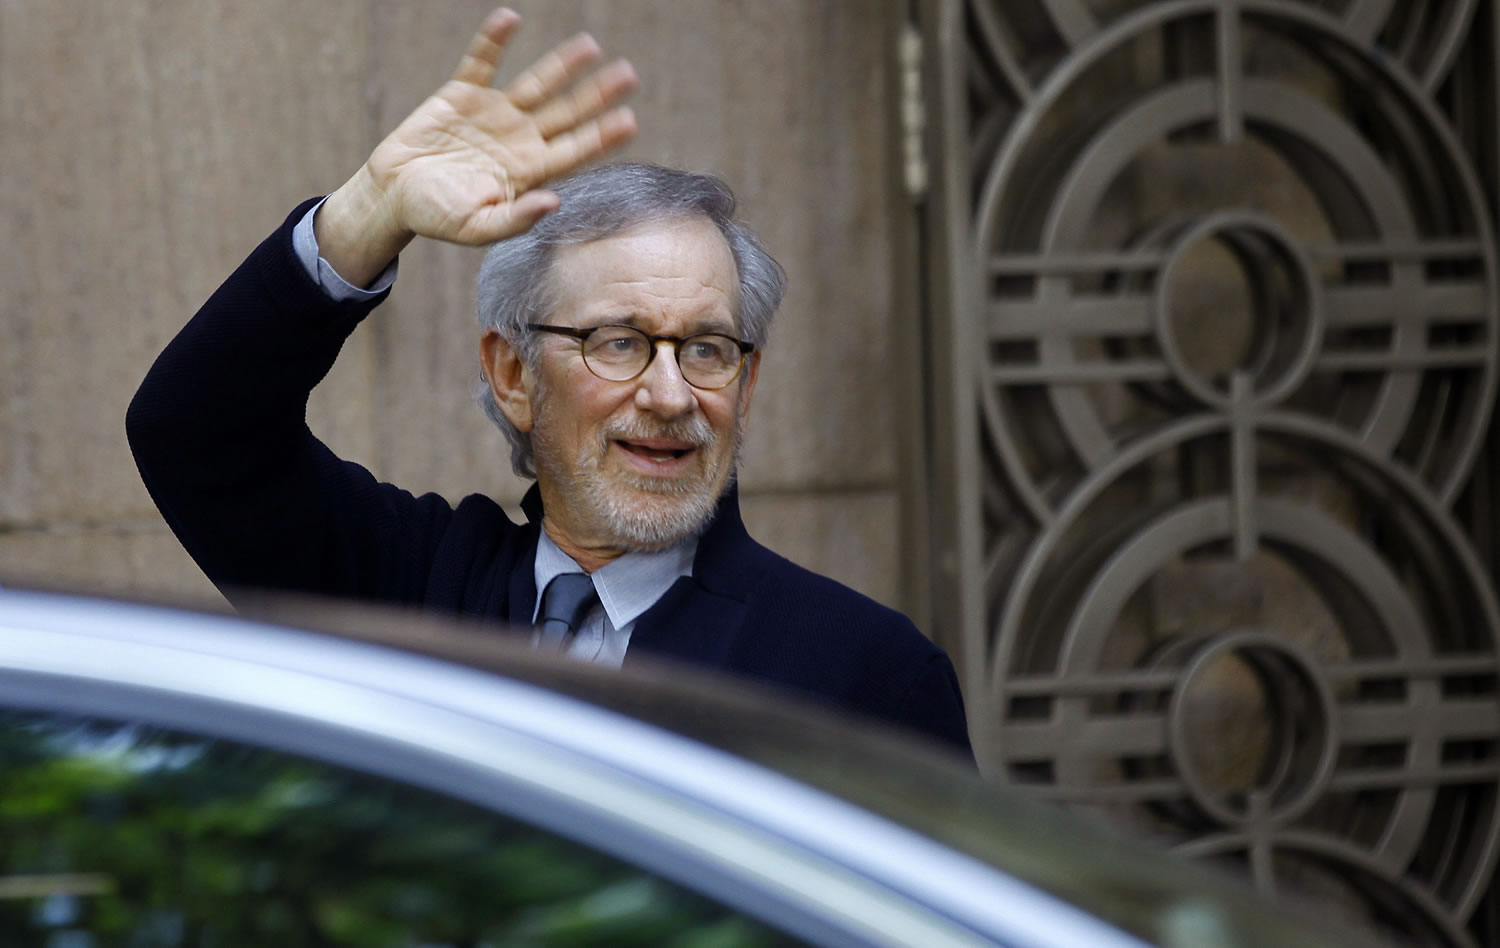 Director Steven Spielberg waves to the media as he leaves Indian Industrialist Anil Ambani's office in Mumbai, India, on Monday.